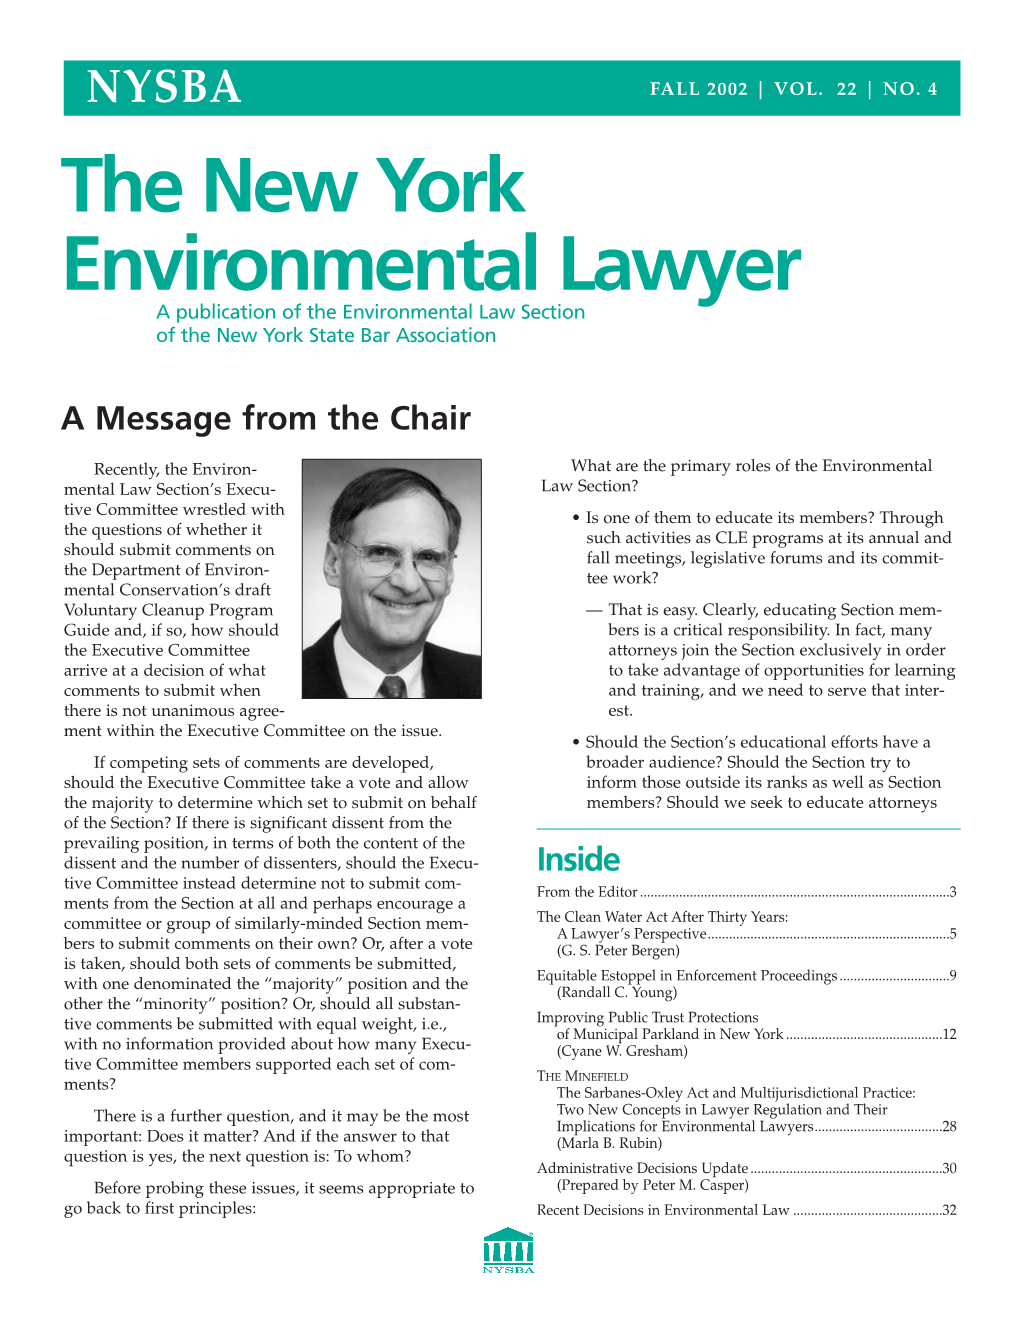 The New York Environmental Lawyer a Publication of the Environmental Law Section of the New York State Bar Association